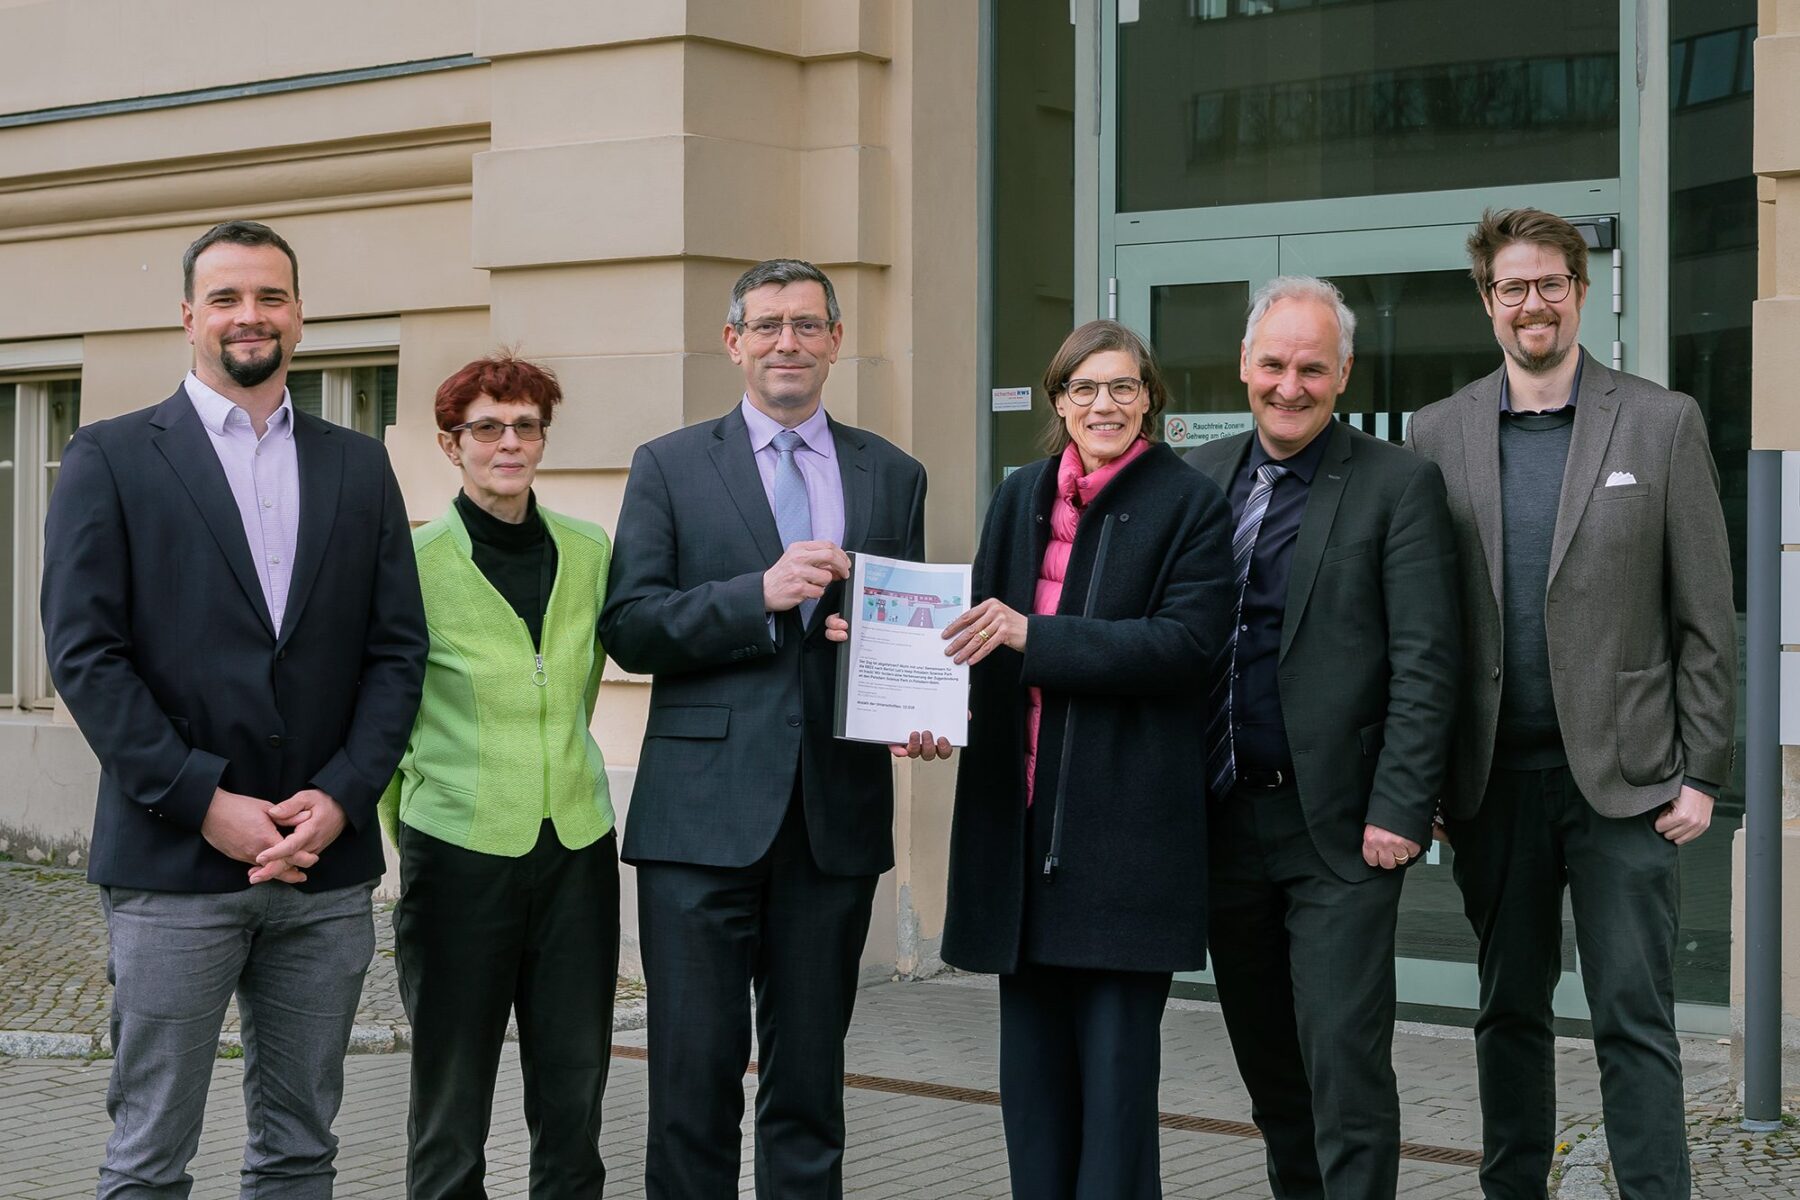 Group photo with representatives of the Potsdam Science Park and State Secretary Uwe Schüler in front of the Ministry of Infrastructure and Regional Planning of the State of Brandenburg